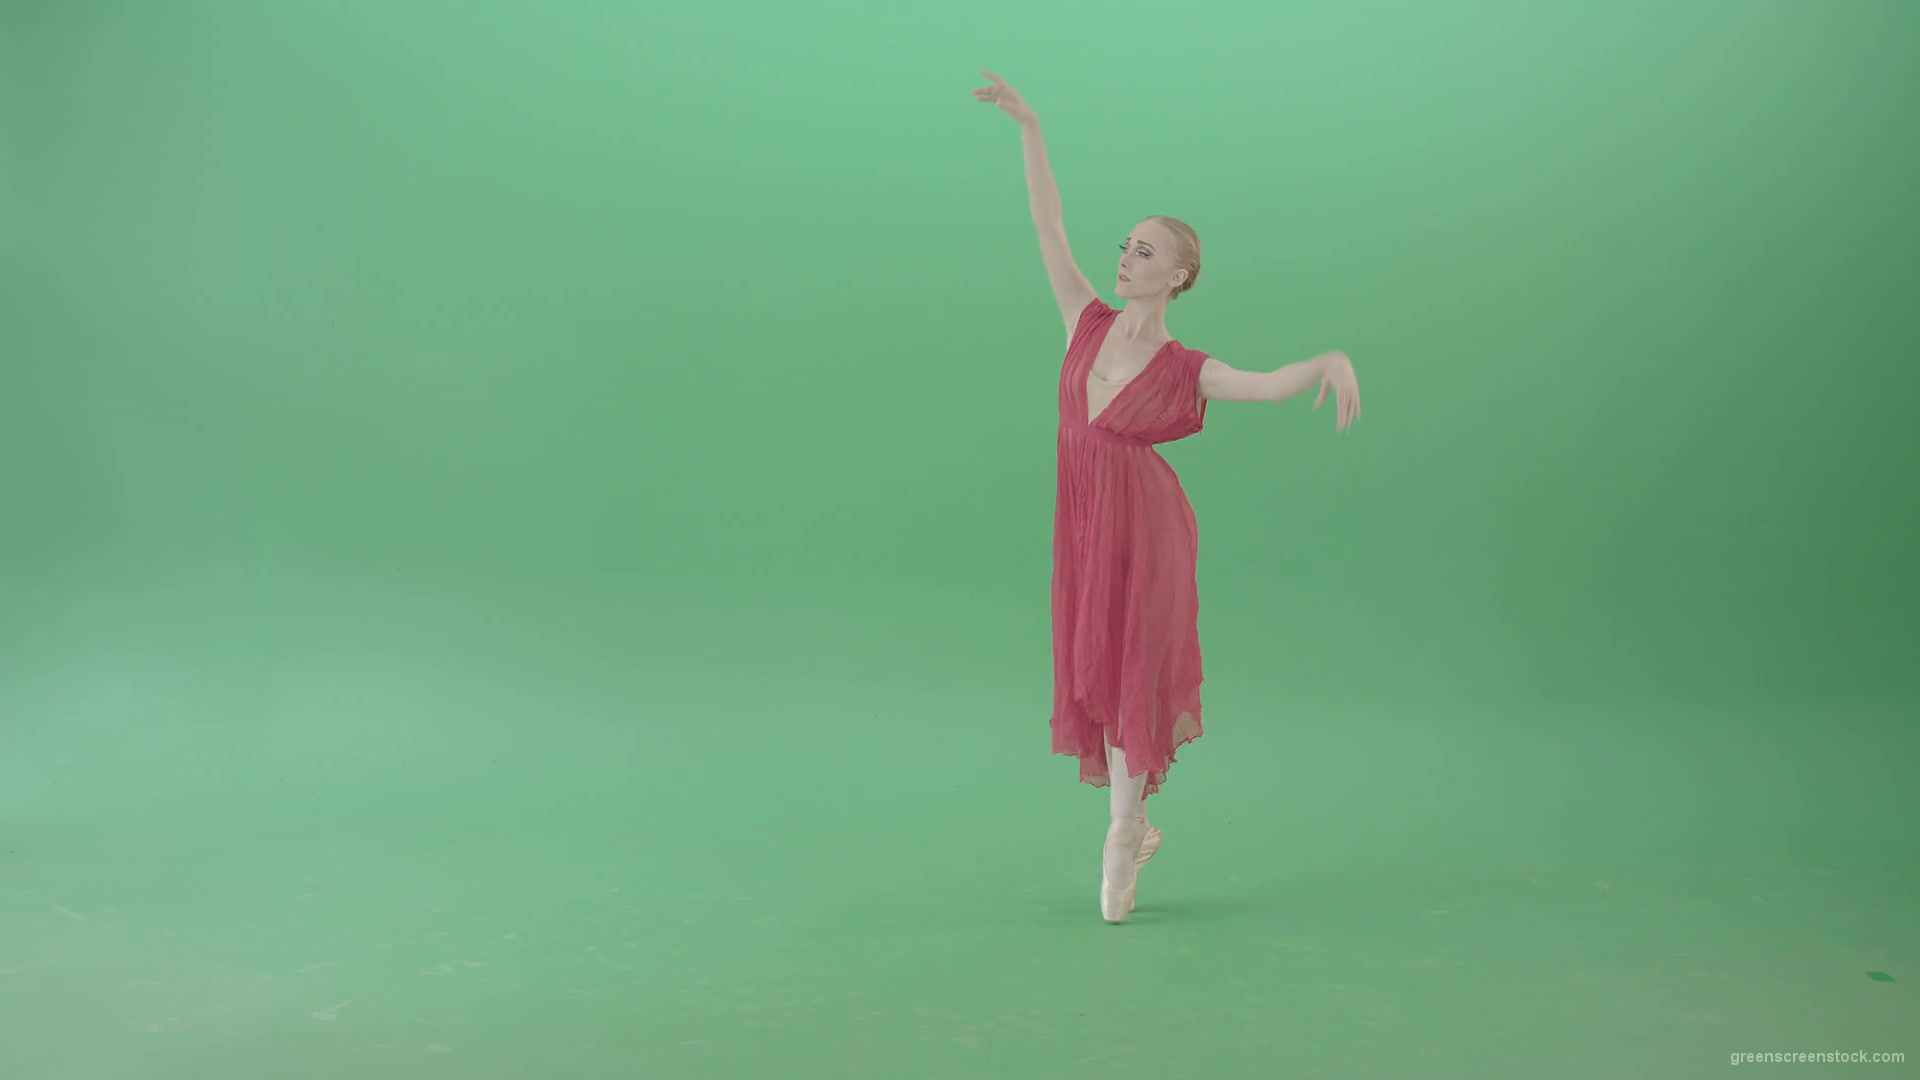 Blonde-girl-in-red-dress-dancing-classical-ballet-on-green-screen-4K-video-footage-1920_005 Green Screen Stock